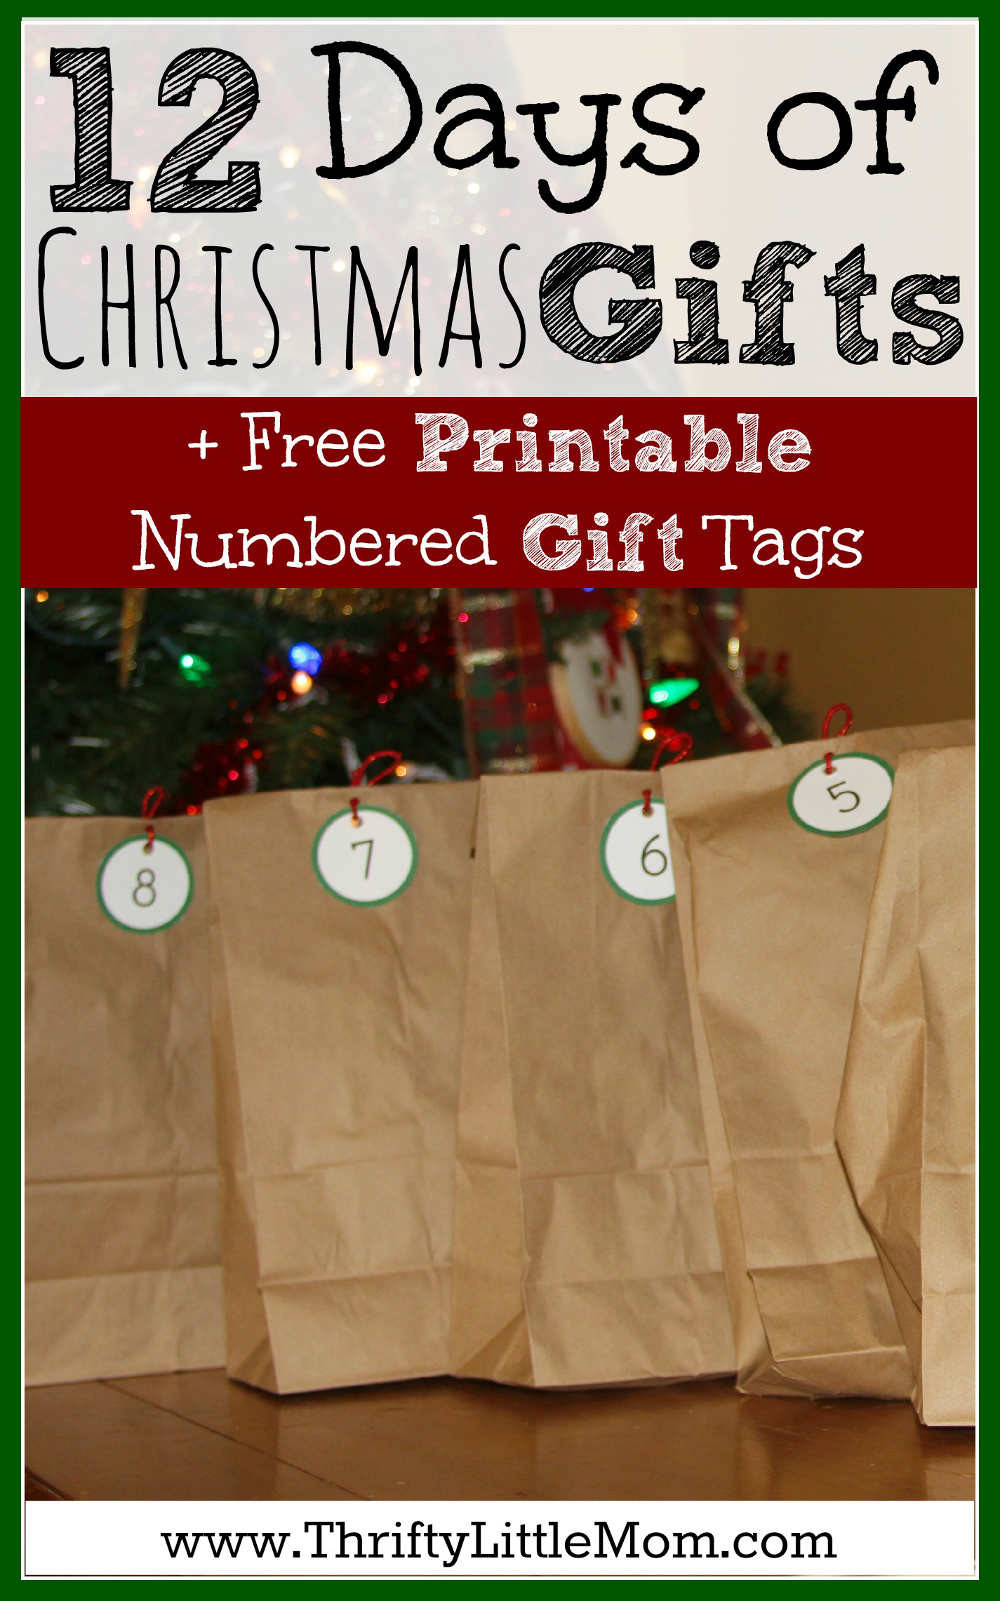 12 Days Of Christmas Gift Ideas For Kids
 The 12 Days of Christmas Project Day 9 of Getting Into